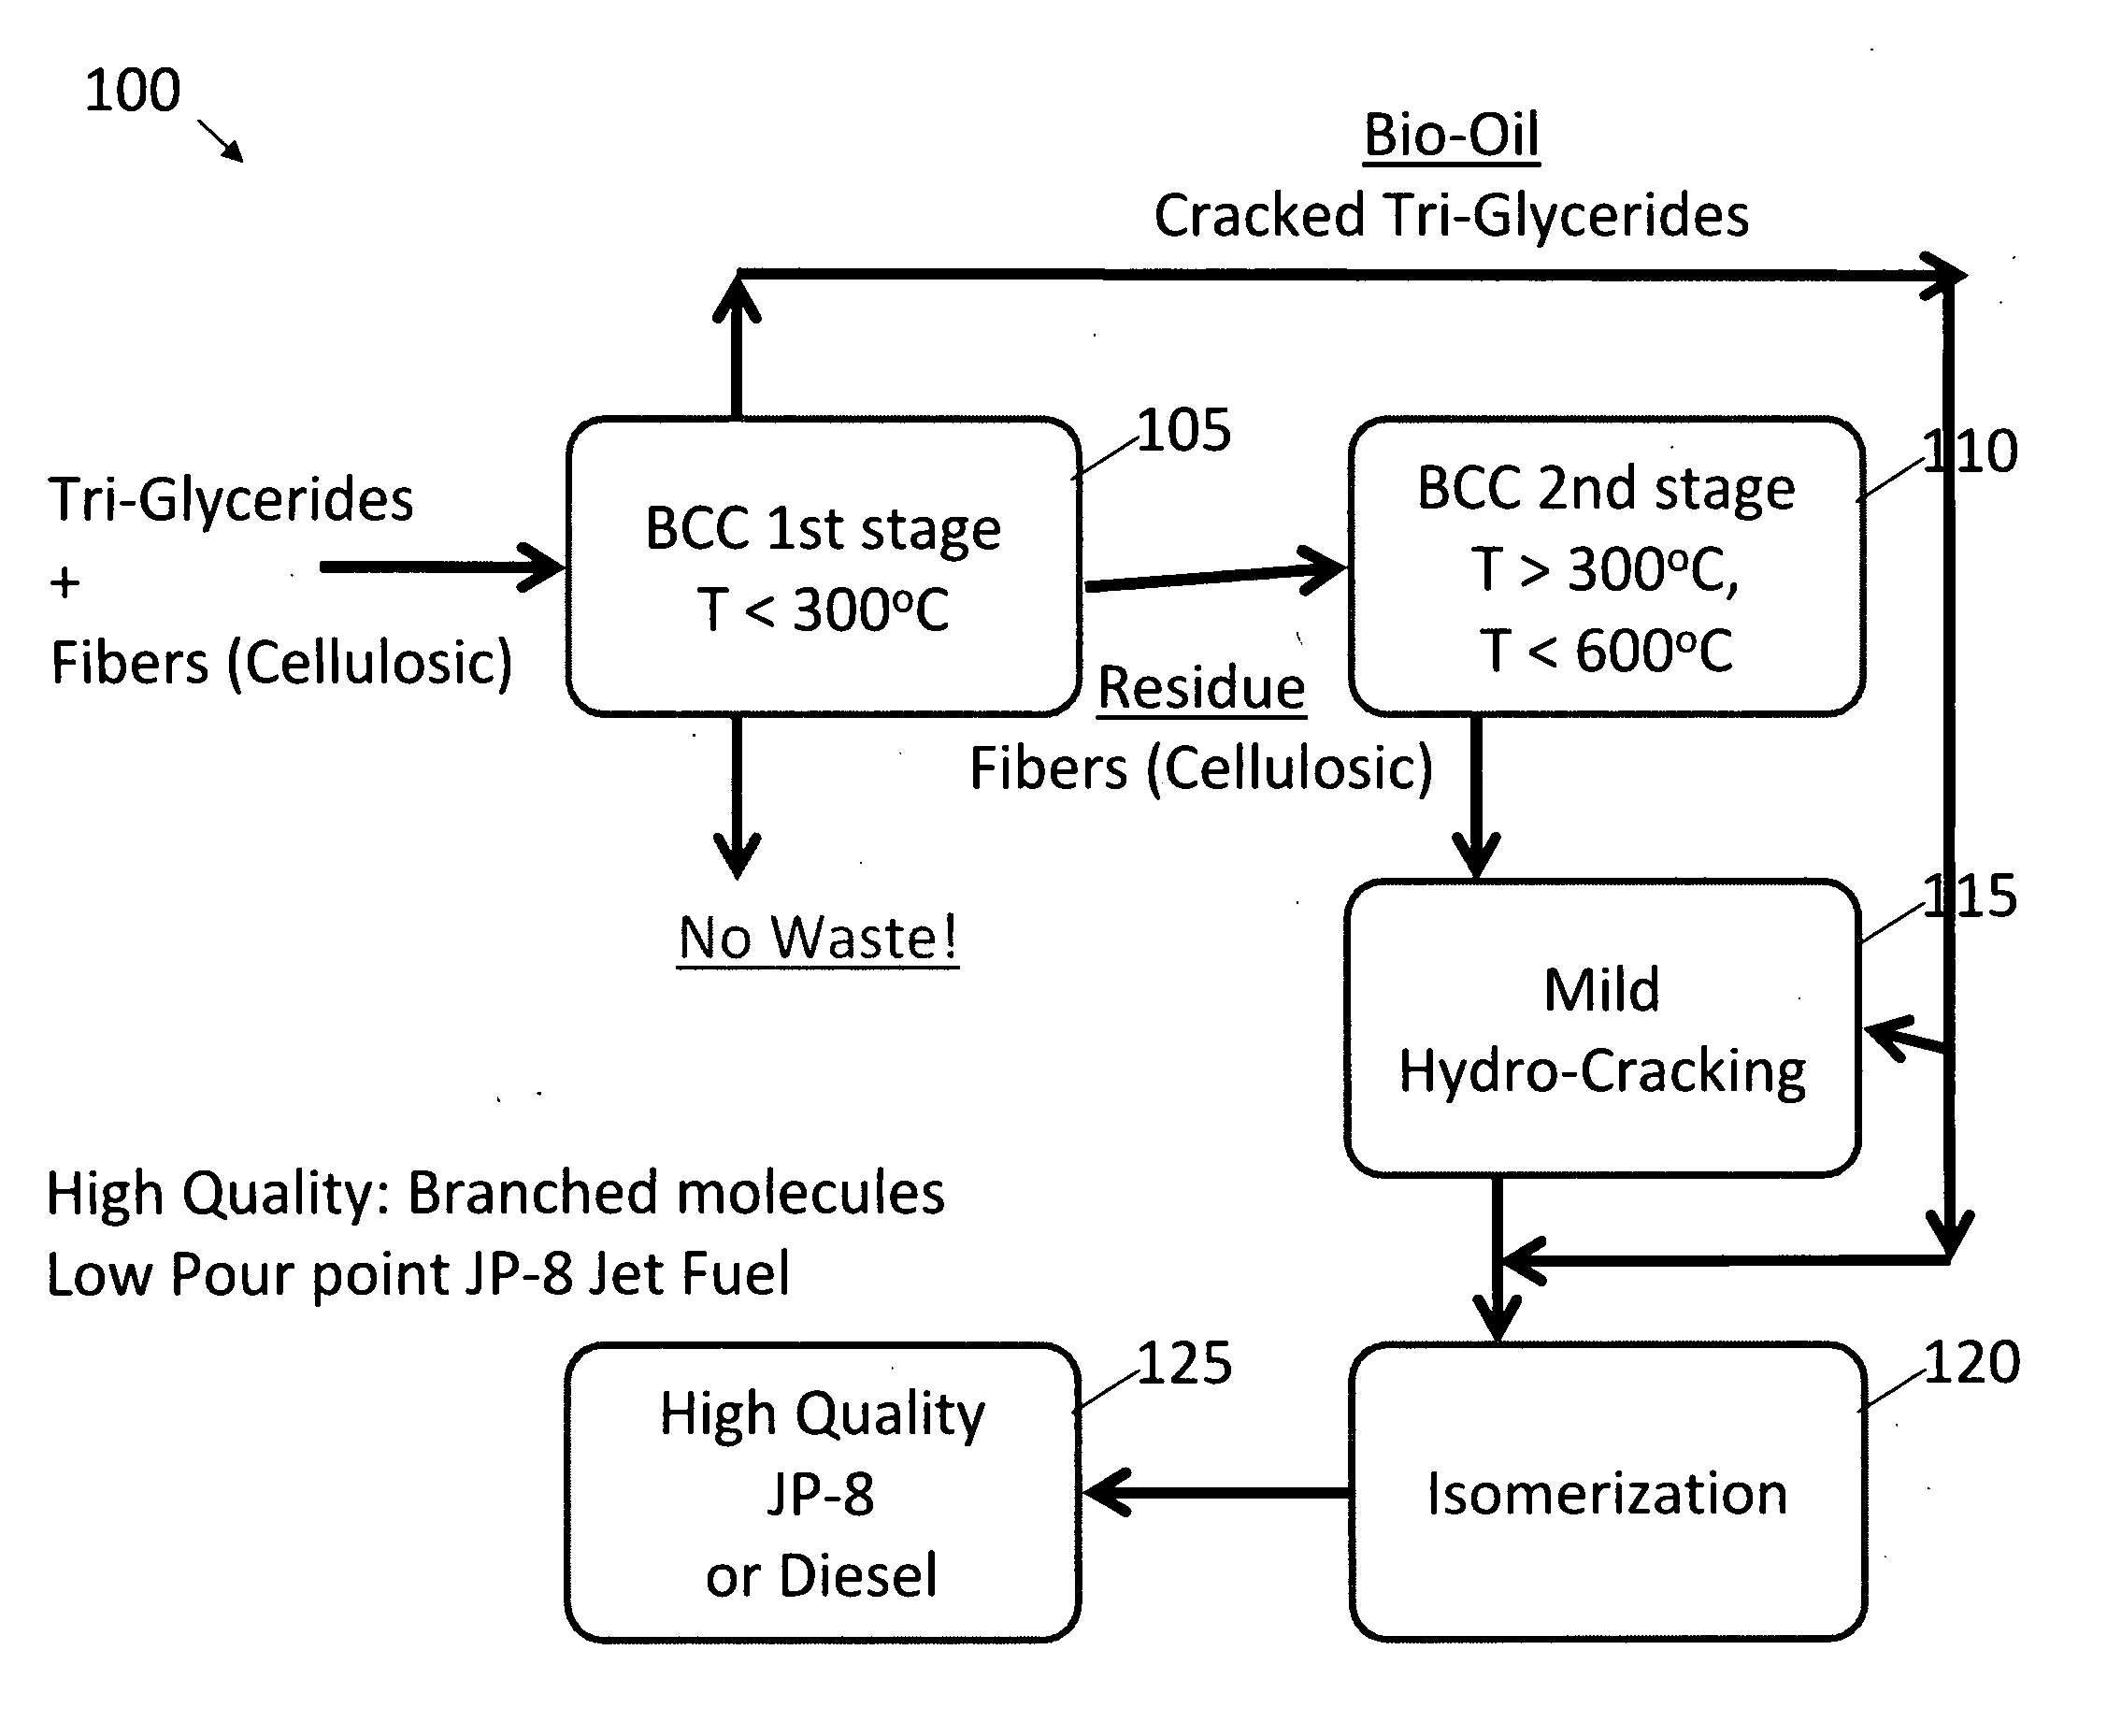 Producing fuel and specialty chemicals from glyceride containing biomass